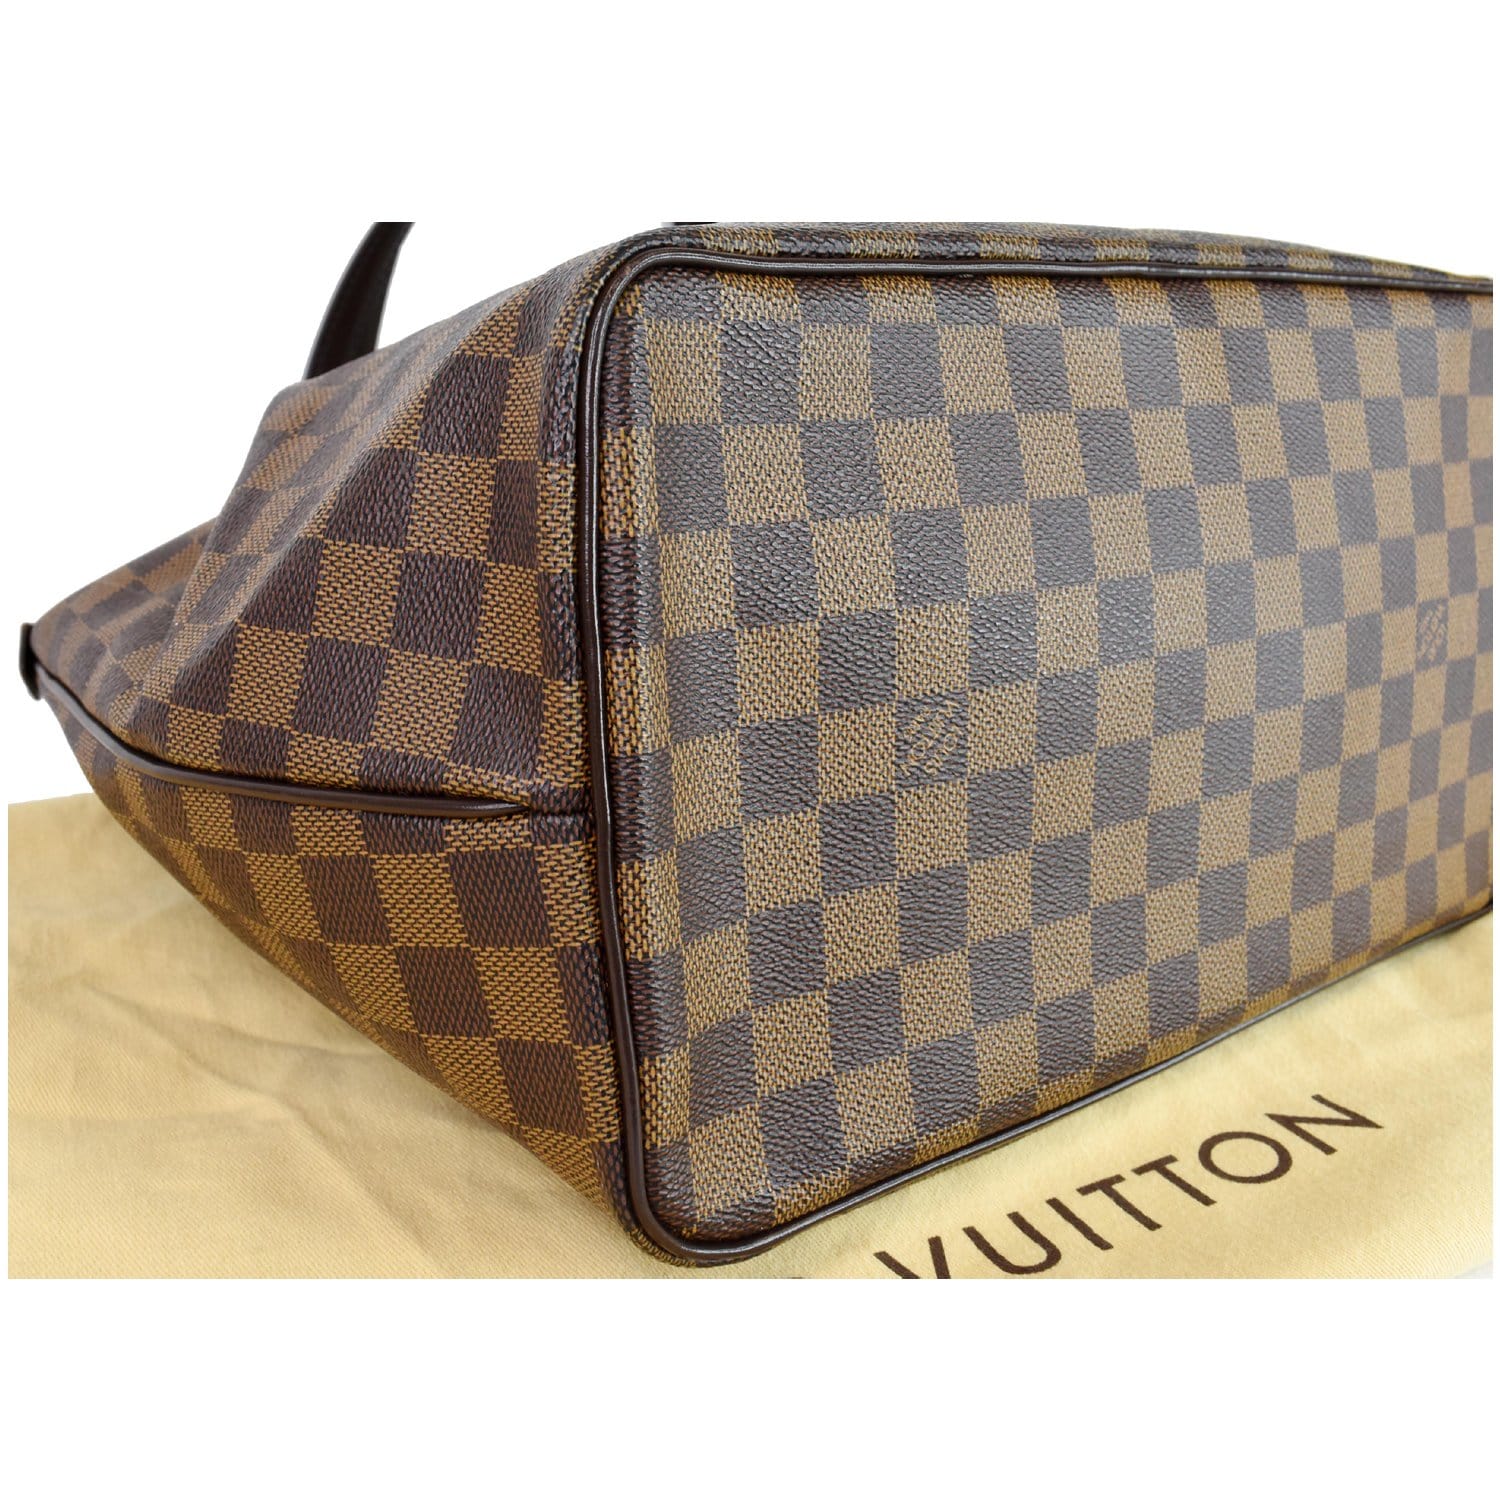 Louis Vuitton Westminster Tote 395907, Rock Wild leather shoulder bag